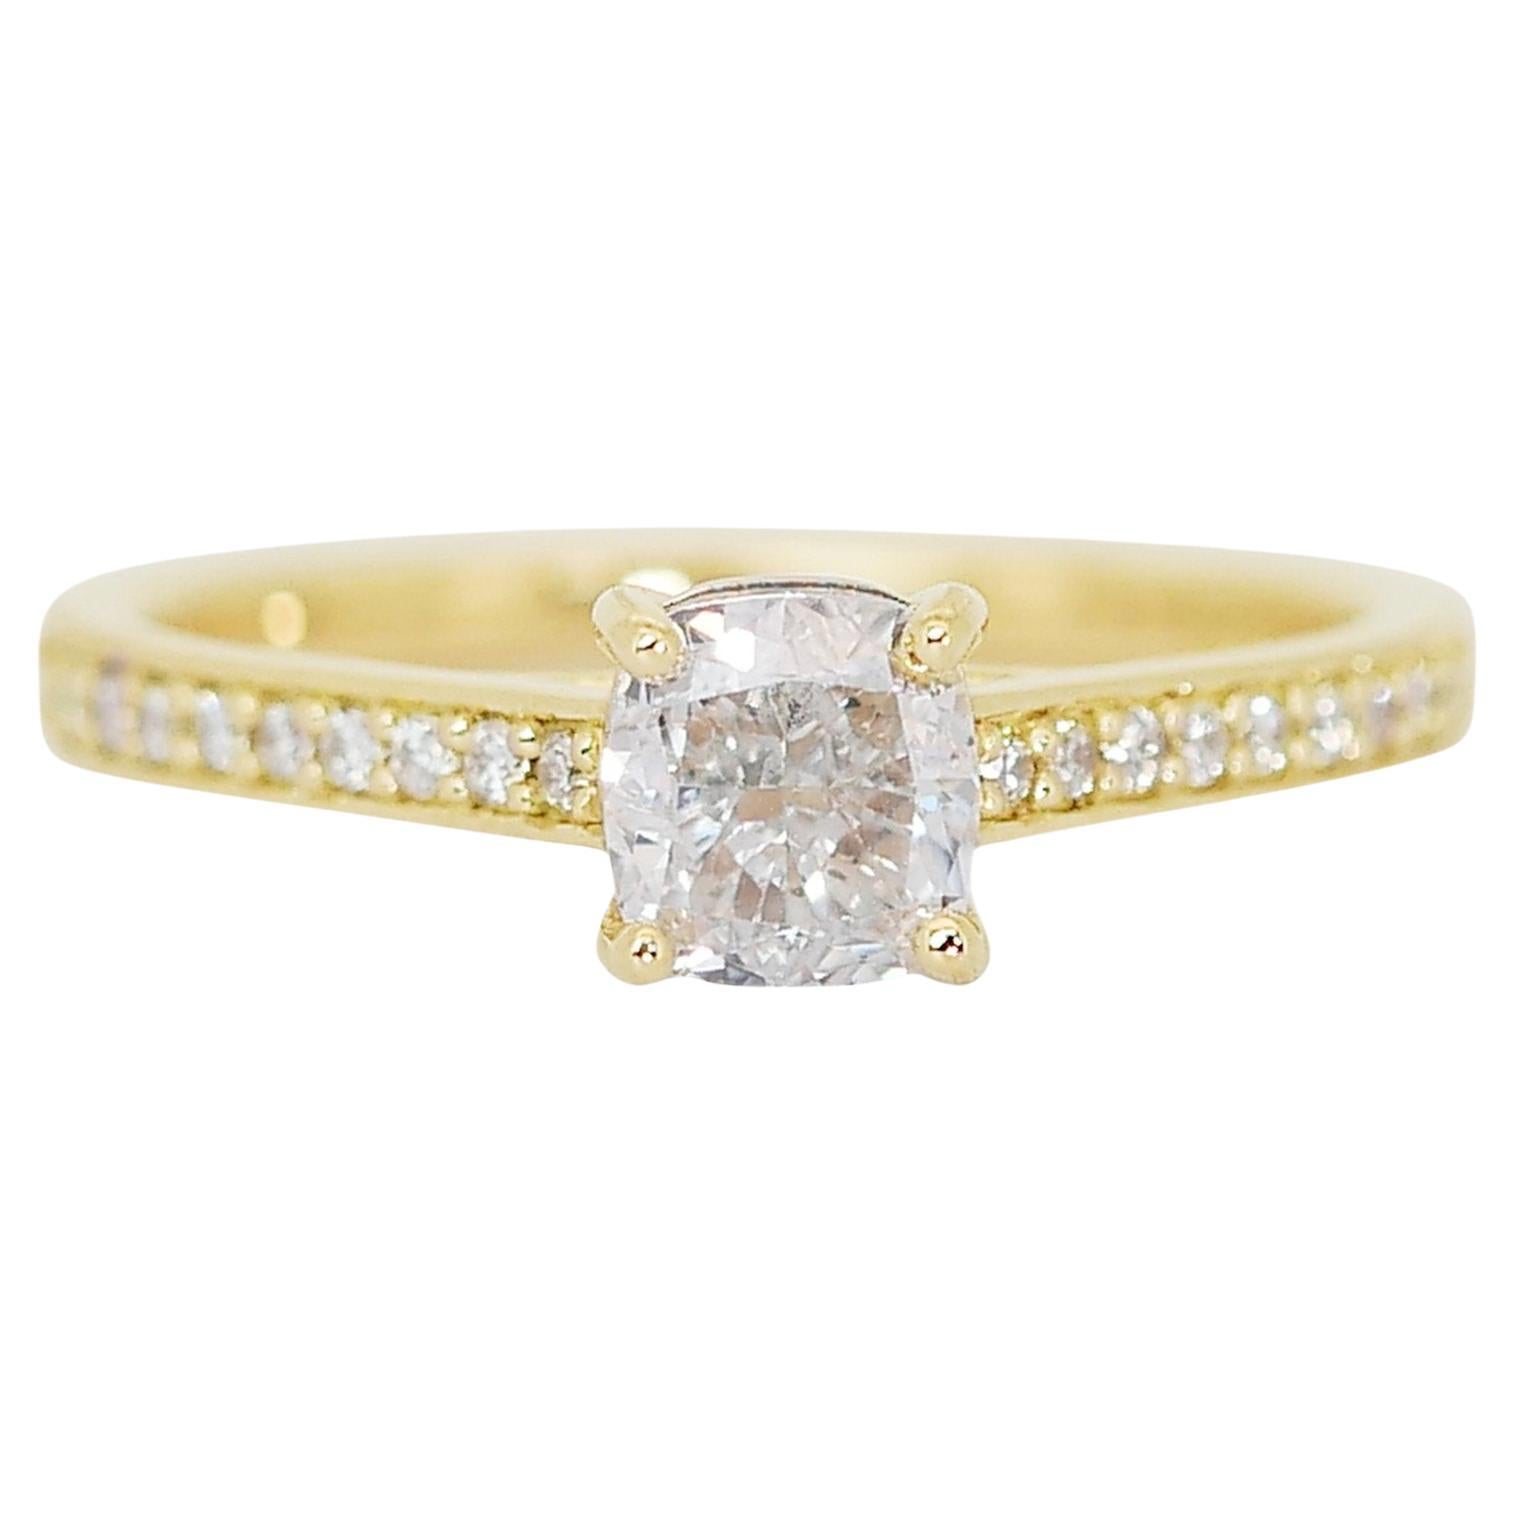 Luminous 1.17ct Diamond Pave Ring in 18k Yellow Gold – GIA Certified For Sale